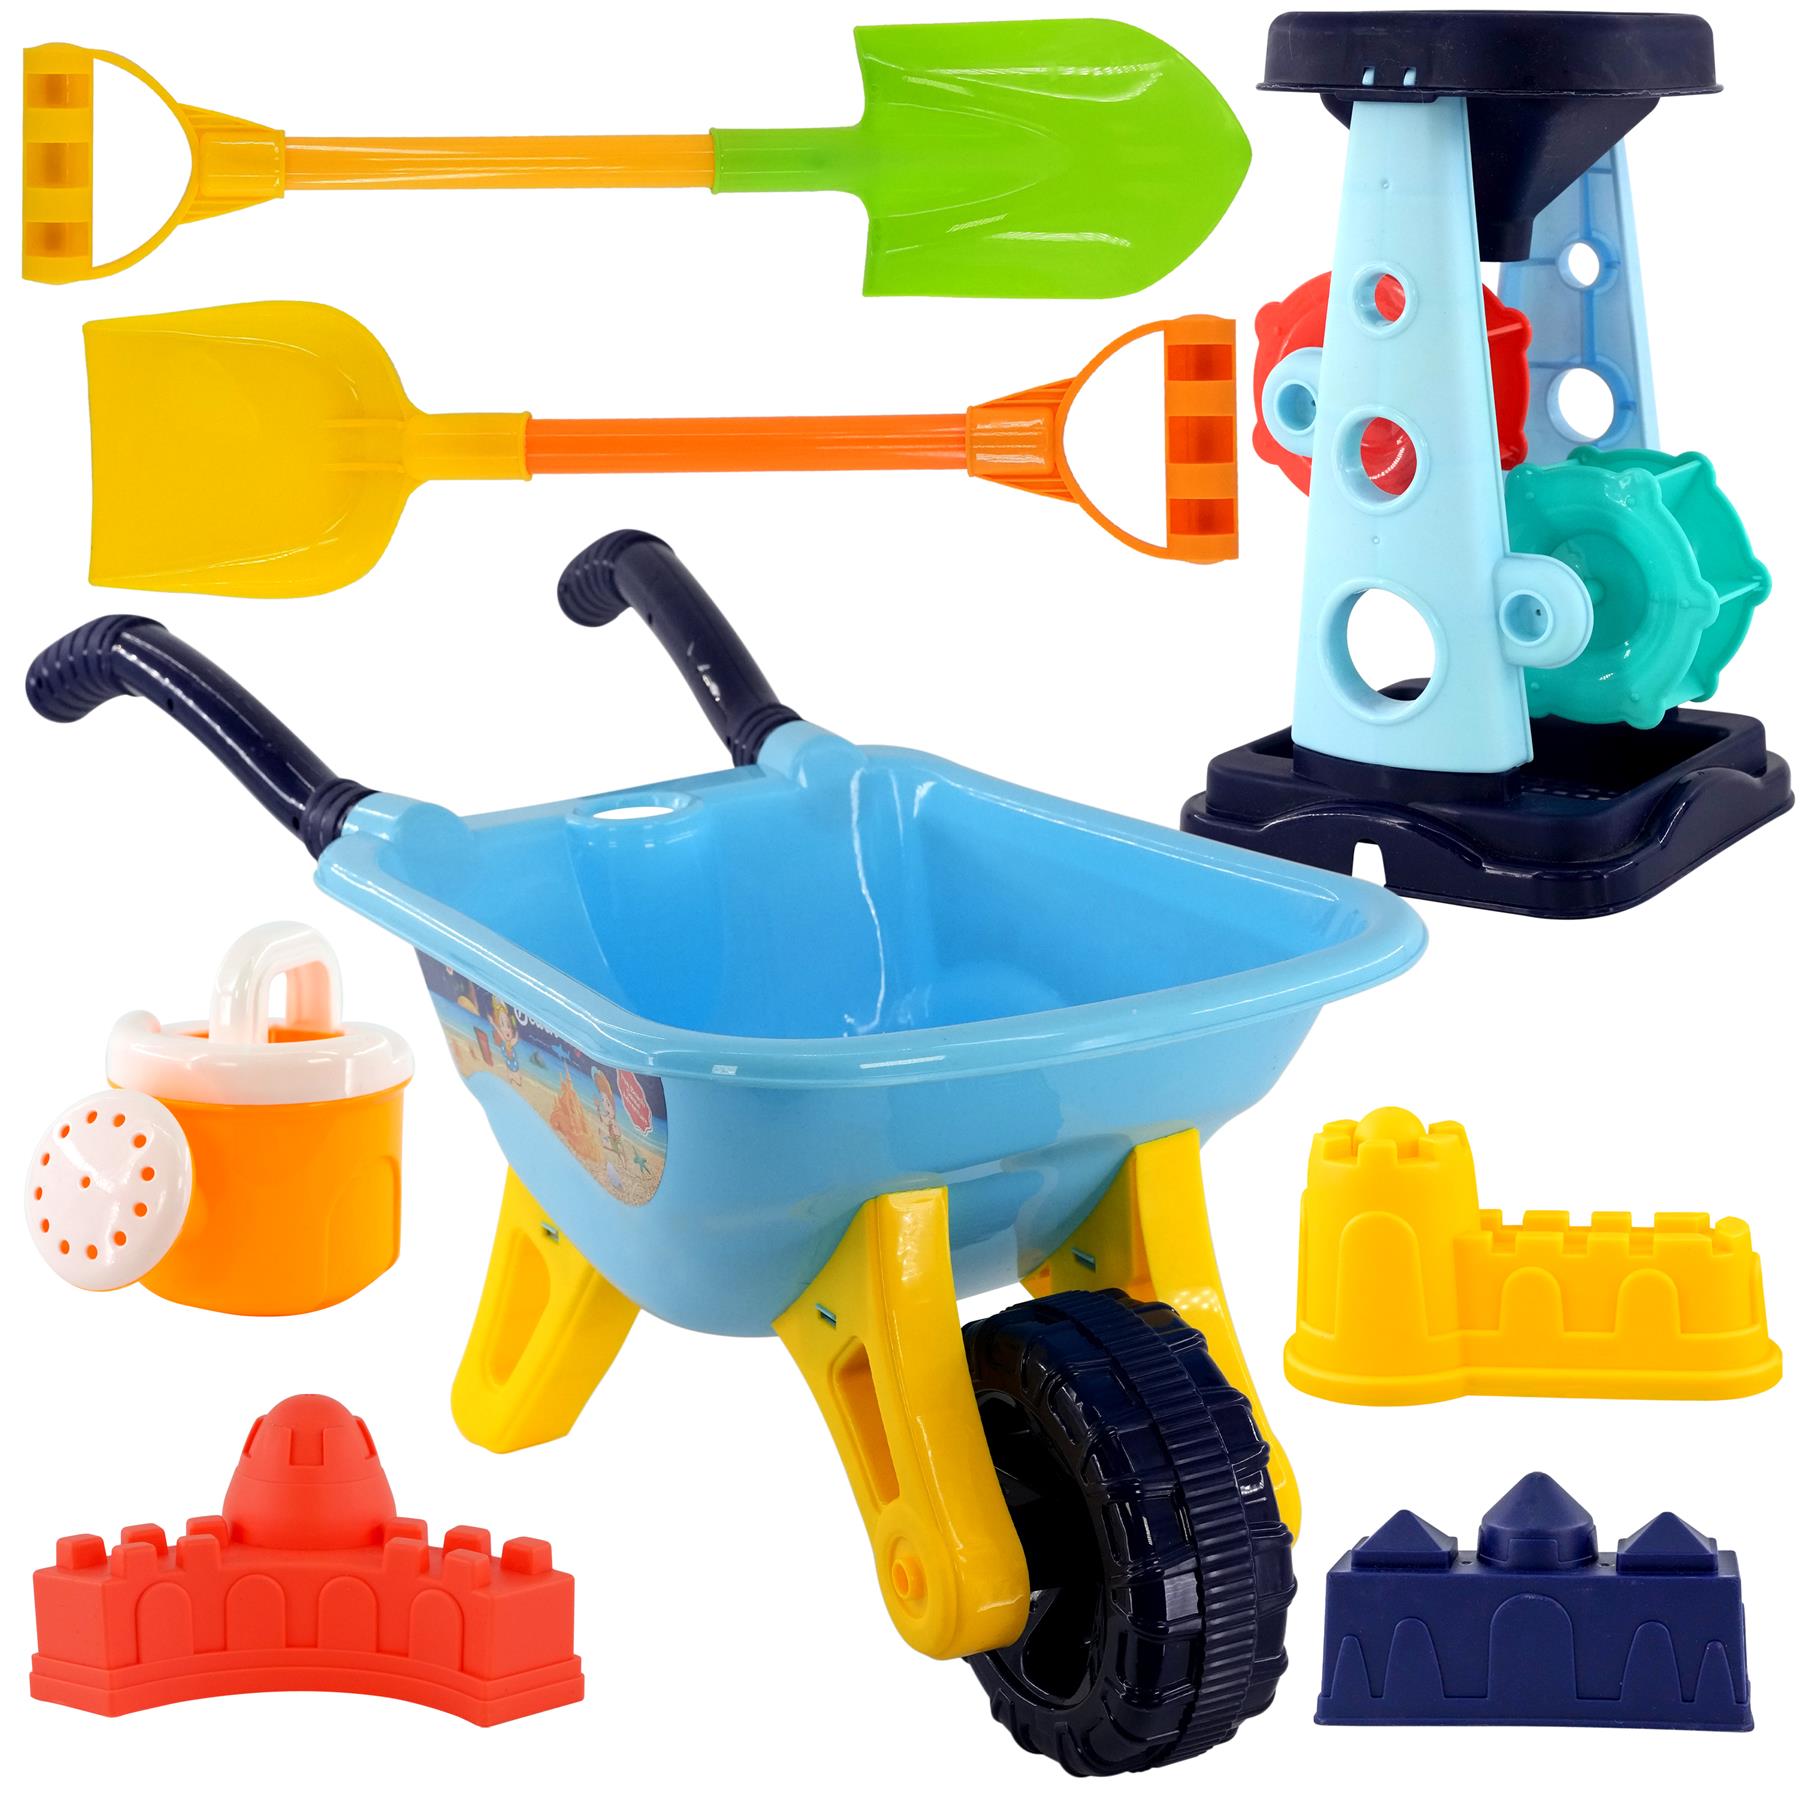 Children Sand and Water Beach Toys Mill, Wheelbarrow Accessories Playset by The Magic Toy Shop - The Magic Toy Shop